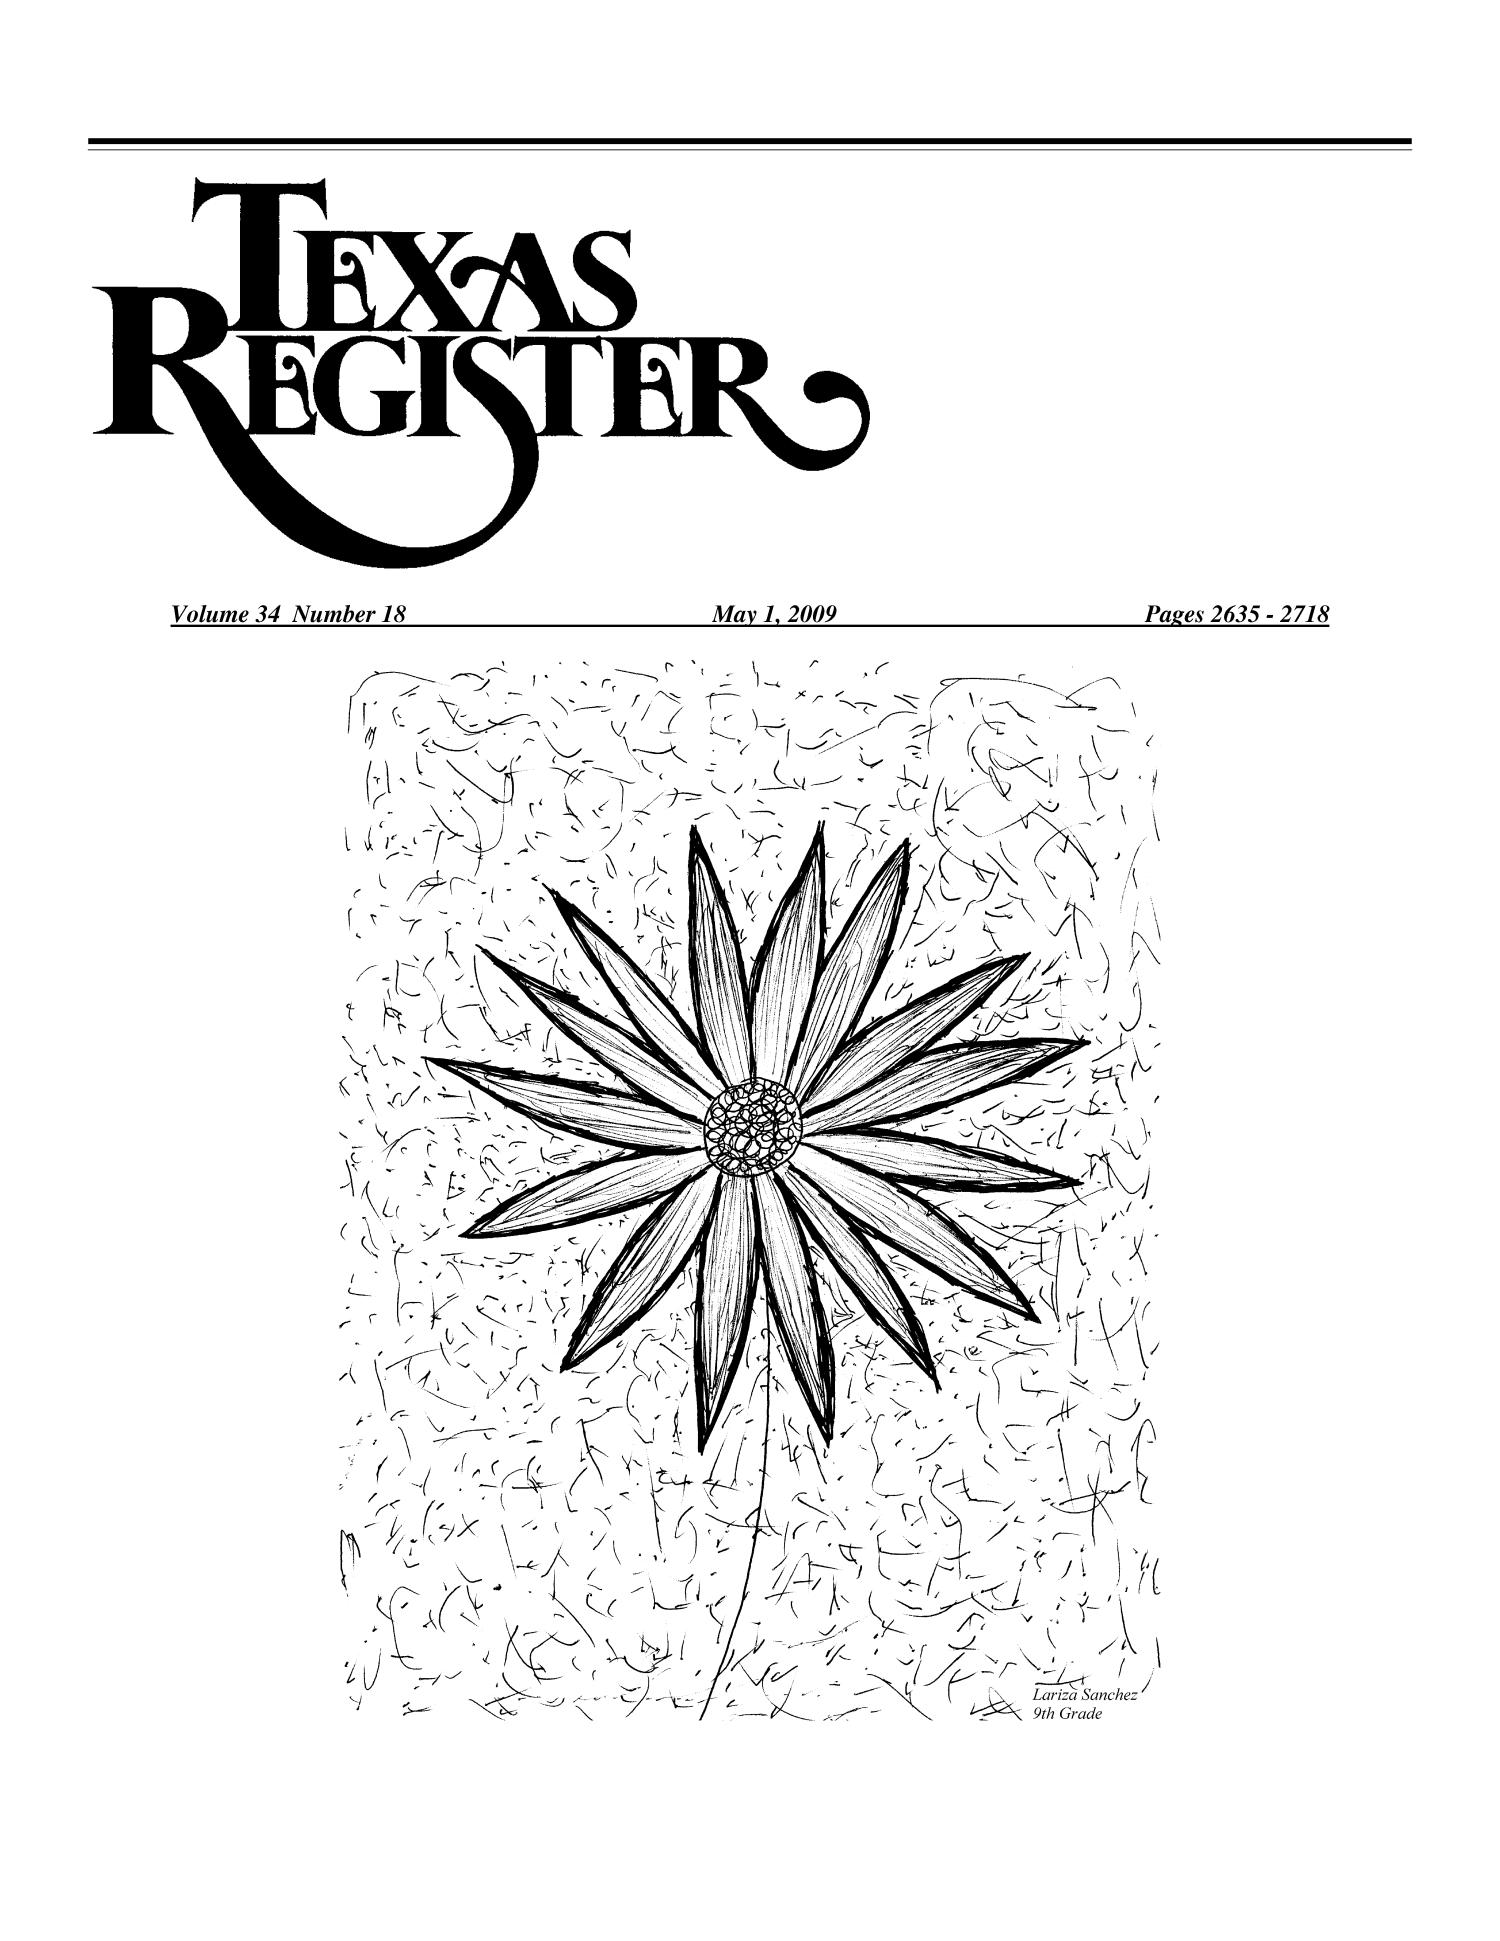 Texas Register, Volume 34, Number 18, Pages 2635-2718, May 1, 2009
                                                
                                                    2635
                                                